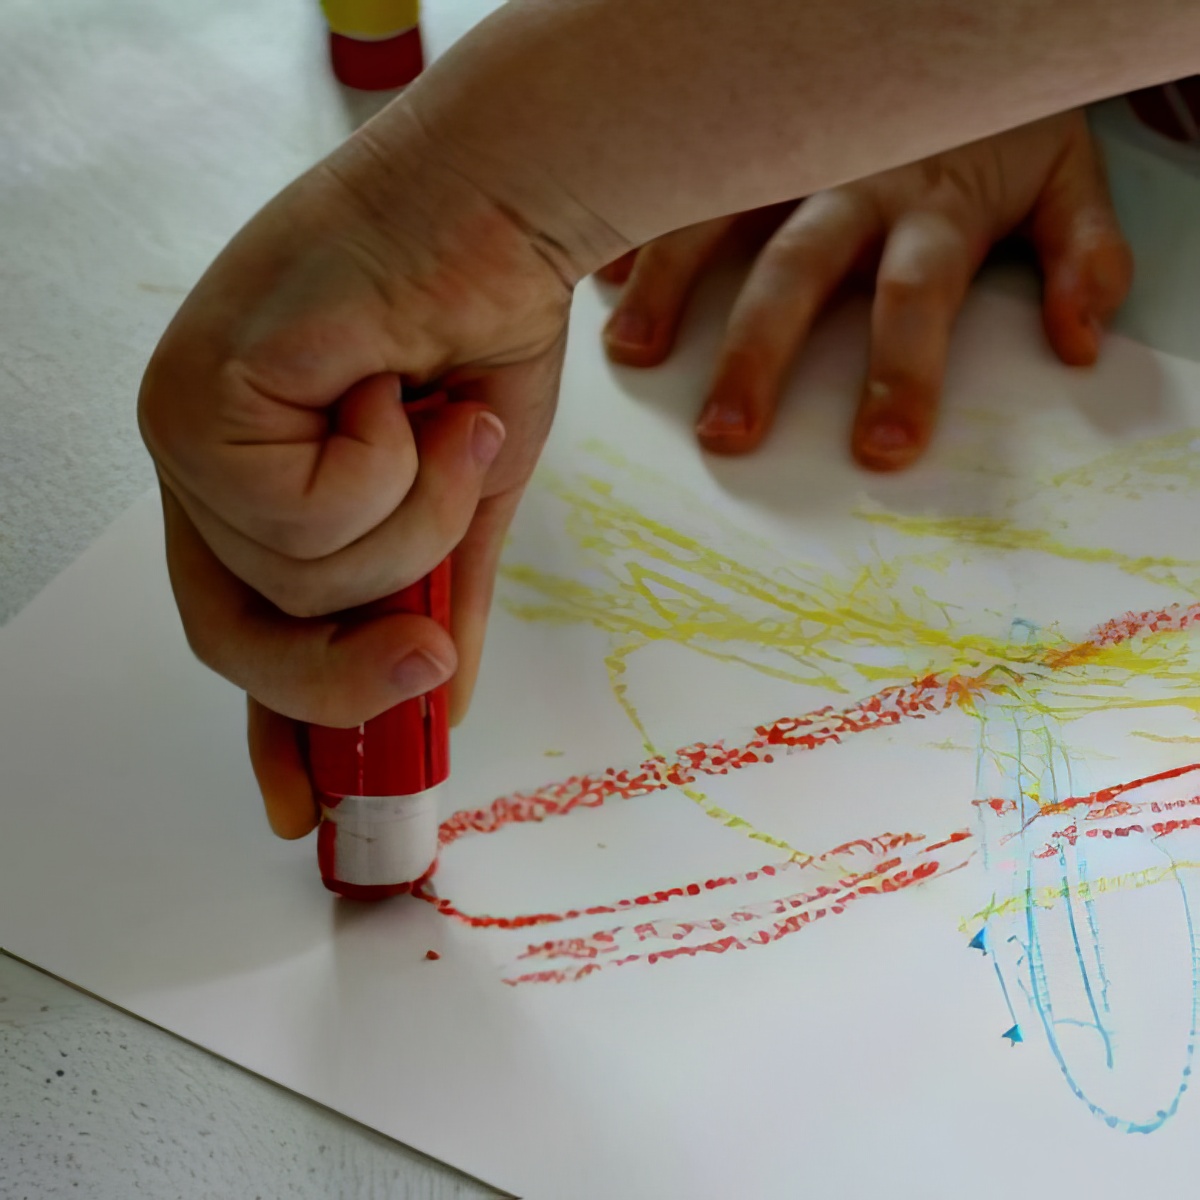 DIY Crayons, DIY twistable crayons, learning activities for 2-year-olds